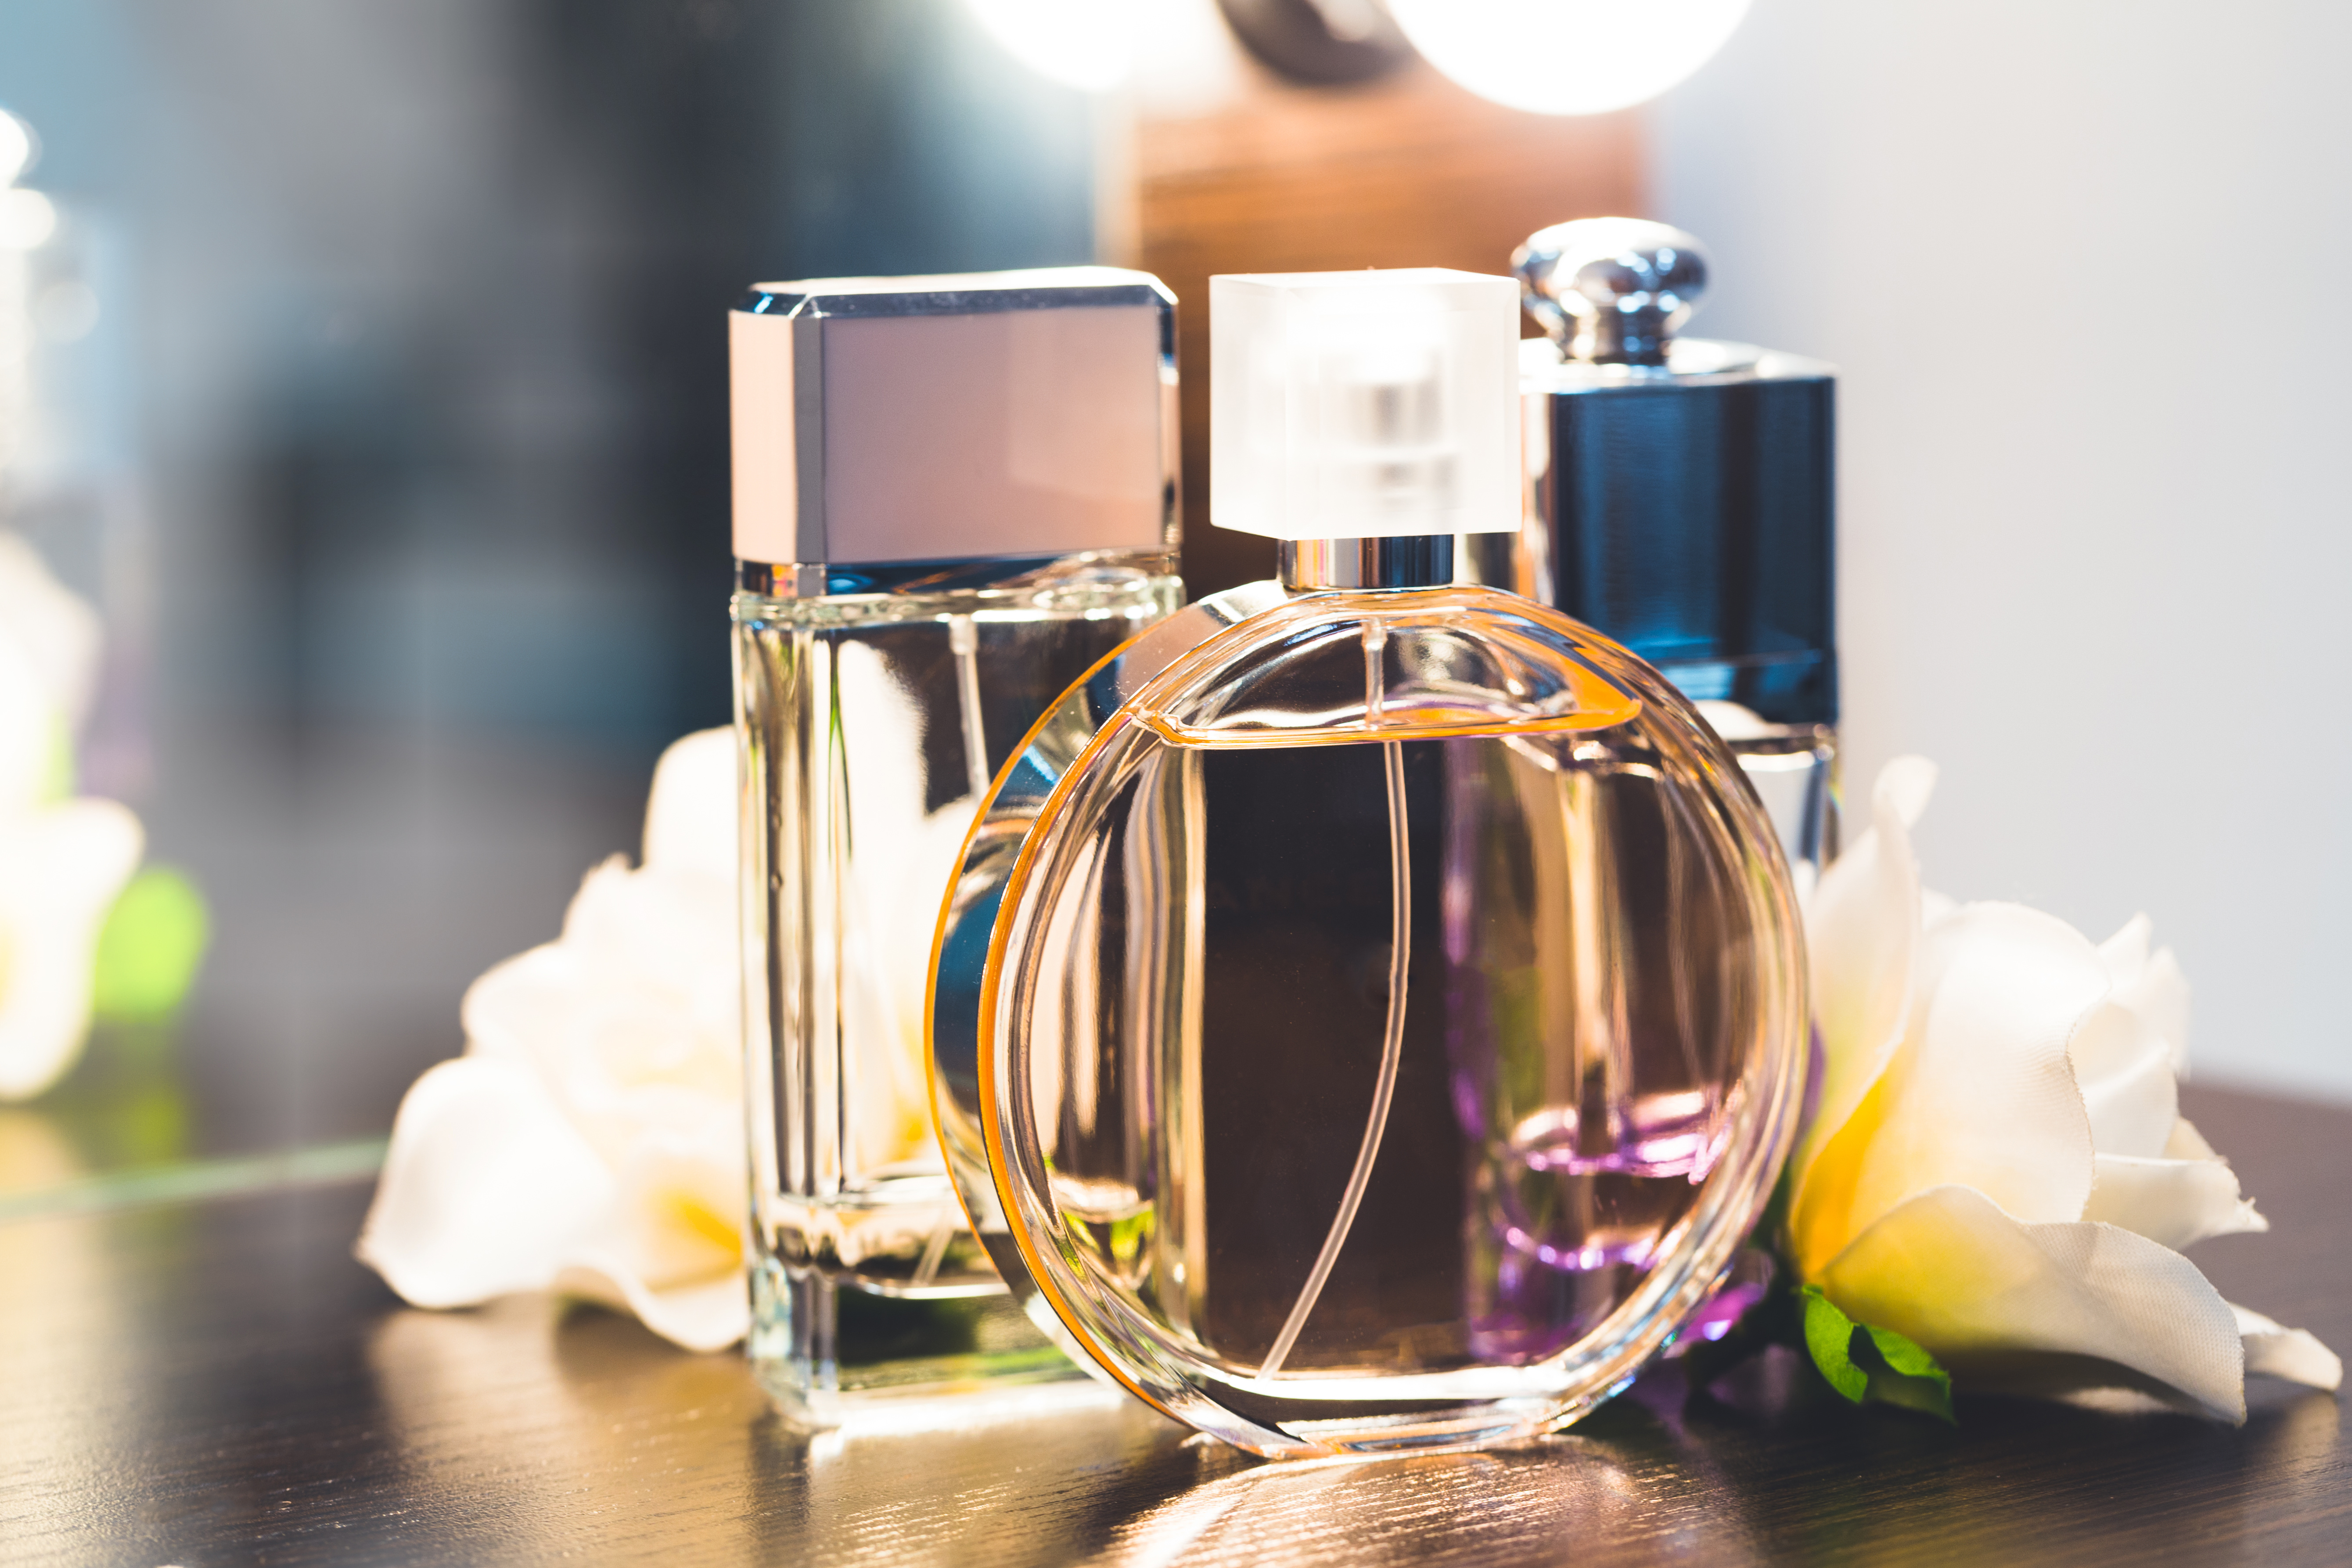 The Research Institute for Fragrance Materials, Inc. (RIFM.org) and Creme Global (Cremeglobal.com), a scientific modeling, data analytics, and computing company, partnered to develop an aggregate exposure model for fragrance materials (i.e., the total exposure coming from all different sources). This model looks at the exposure resulting from different fragrance materials used across various cosmetic, personal, household, and air care products. RIFM has used the model for more than six years to help refine the assessment of fragrance materials. As a result, it has substantially impacted the improvement of consumer safety of fragrances and the reduction of animal testing. New Features and enhanced benefits for RIFM members RIFM and Creme Global are now considering a simplified service agreement to allow more broadly based access to the model. The value of the Creme RIFM Exposure Model will be the same for all members — large and small fragrance manufacturers and consumer companies. The model can help: • Assess contaminant exposure & risk • Understand new fragrance chemical exposures • Identify exposures to residuals in the manufacturing process • Demonstrate safe exposures to the consumer for various chosen geographies and population segments • Provide insights on reformulations of both consumer products & fragrance mixtures based on simulating exposures under different use scenarios • Provide marketing insights for all RIFM members by understanding the volume of products on the market & use profiles and the relative source contribution of different product categories (using Kantar World Panel data) Coming soon: RIFM will sponsor a series of webinars this September to highlight the benefits of a subscription to the Creme RIFM Model. Meanwhile, learn more about the model by viewing this recently recorded webinar: The Creme RIFM Aggregate Exposure Model